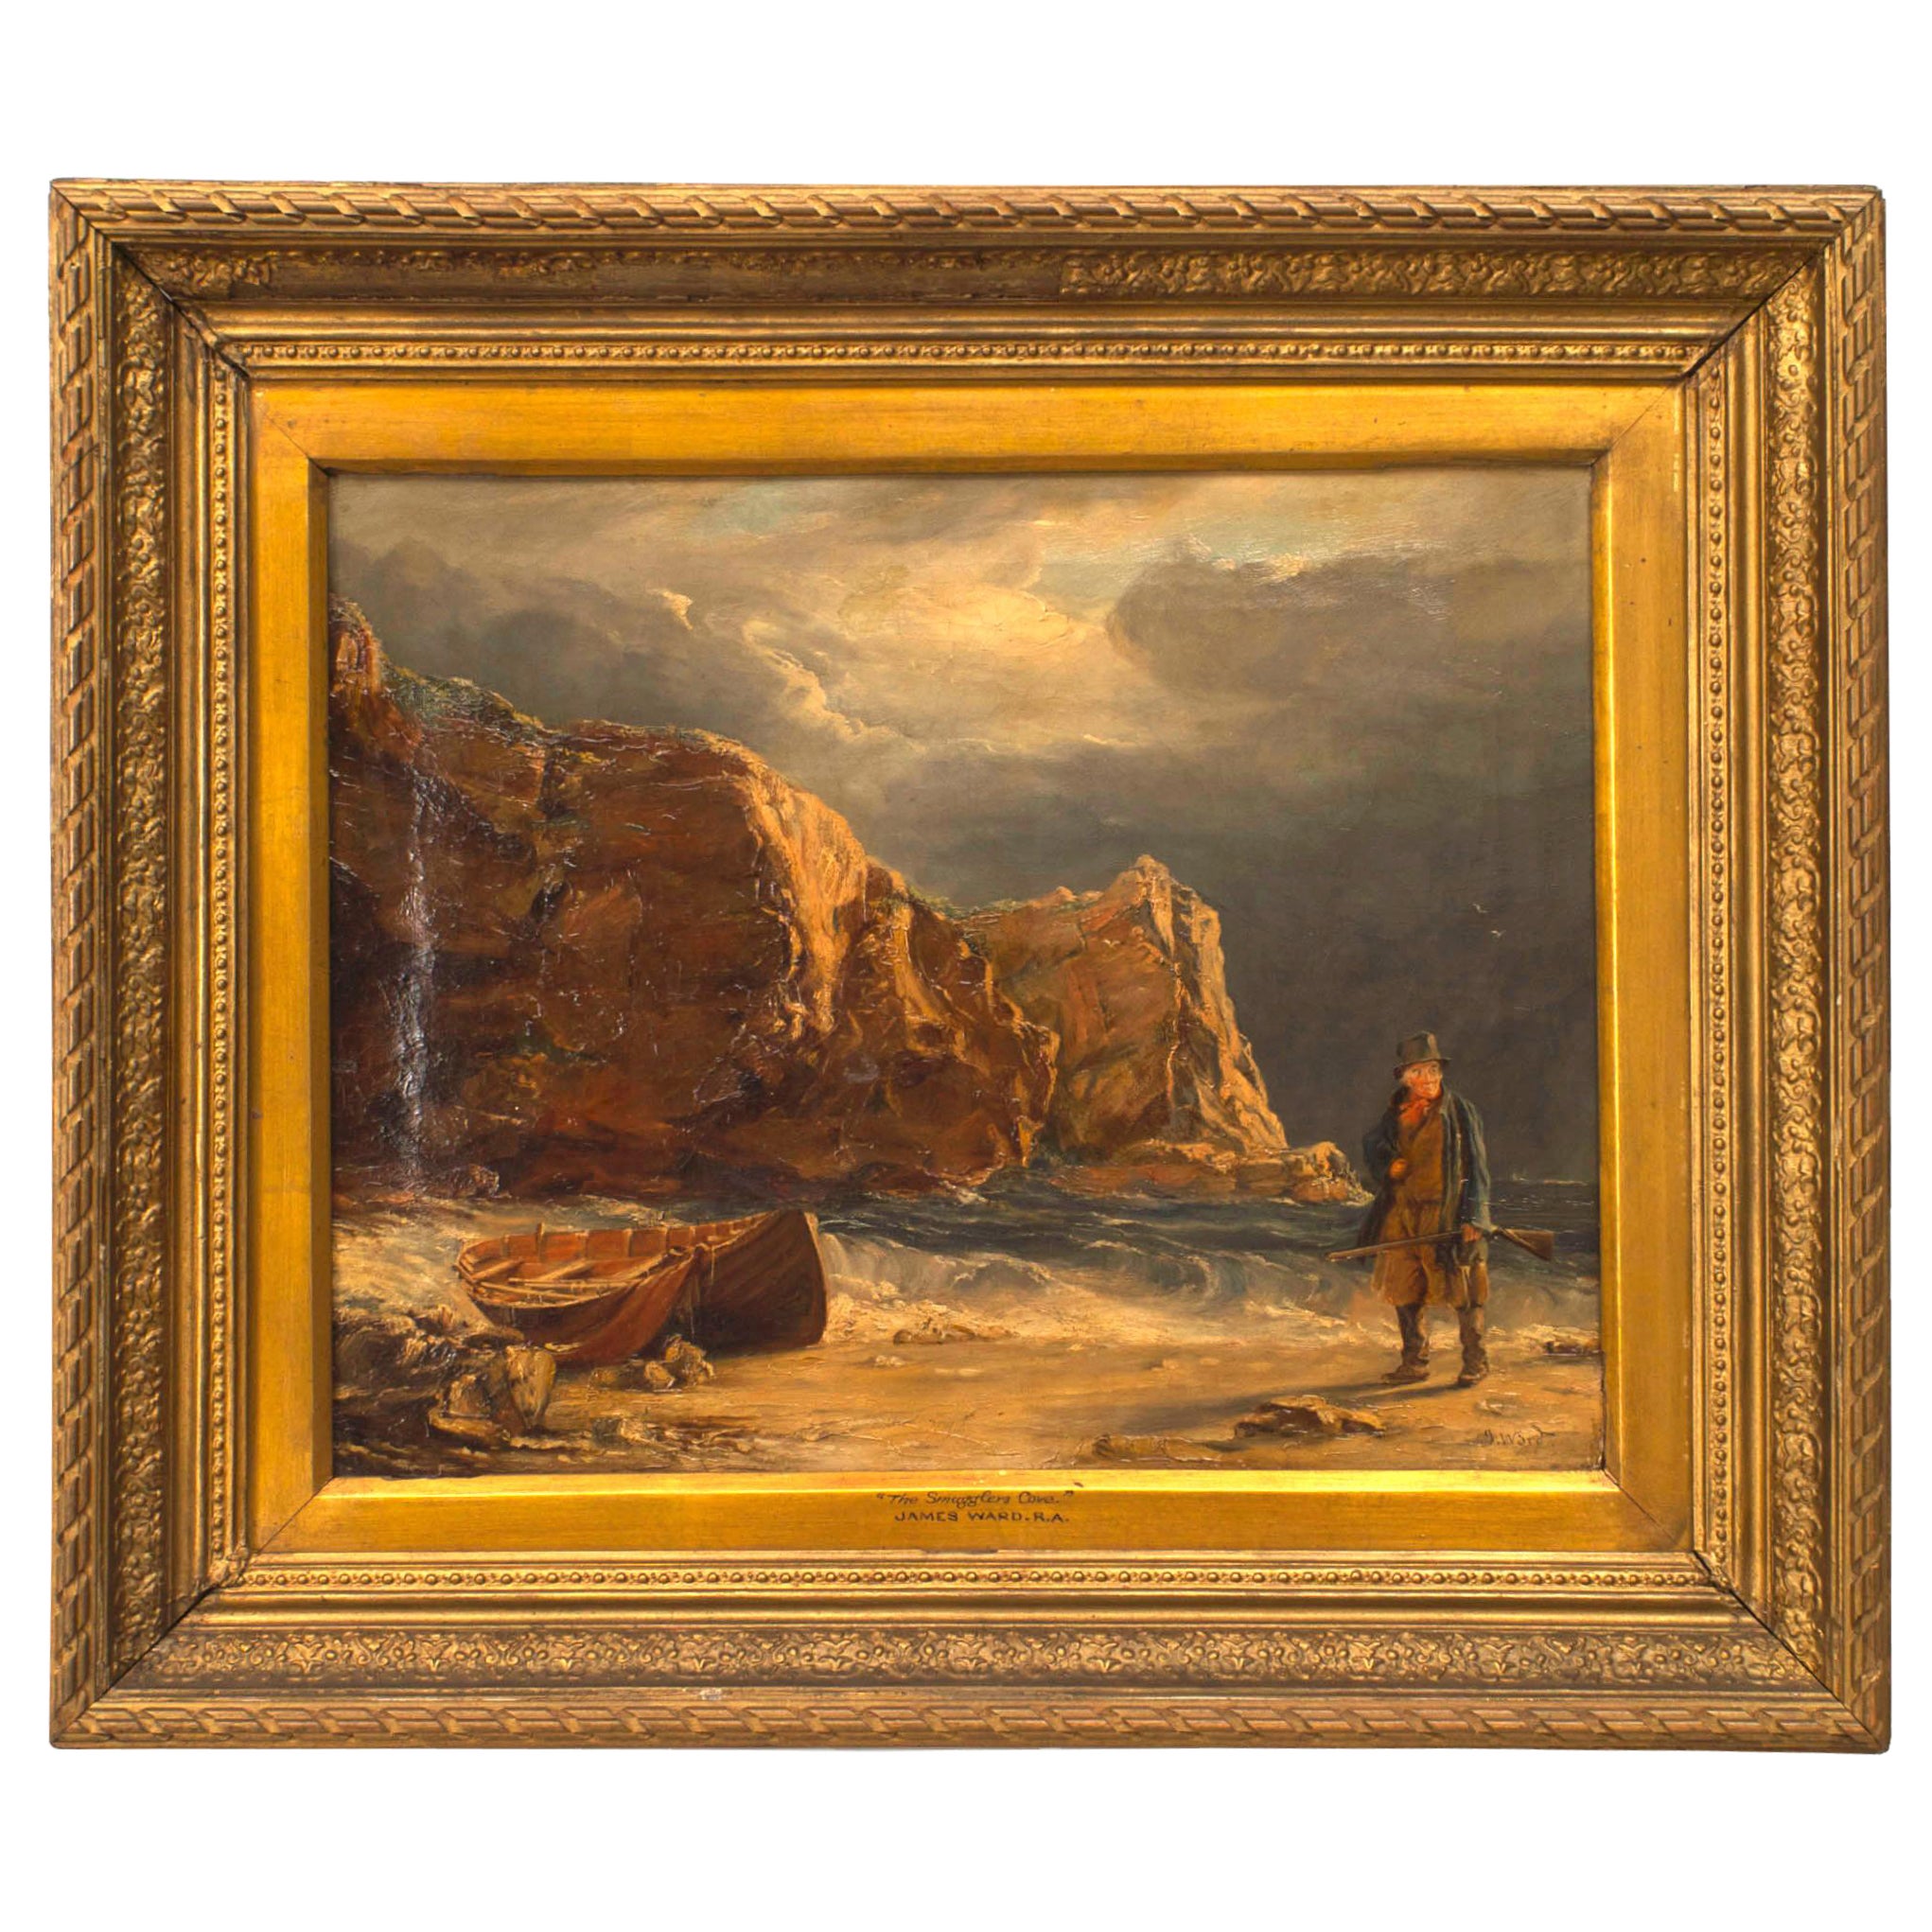 James Ward Oil Painting "The Smuggler's Cove" For Sale